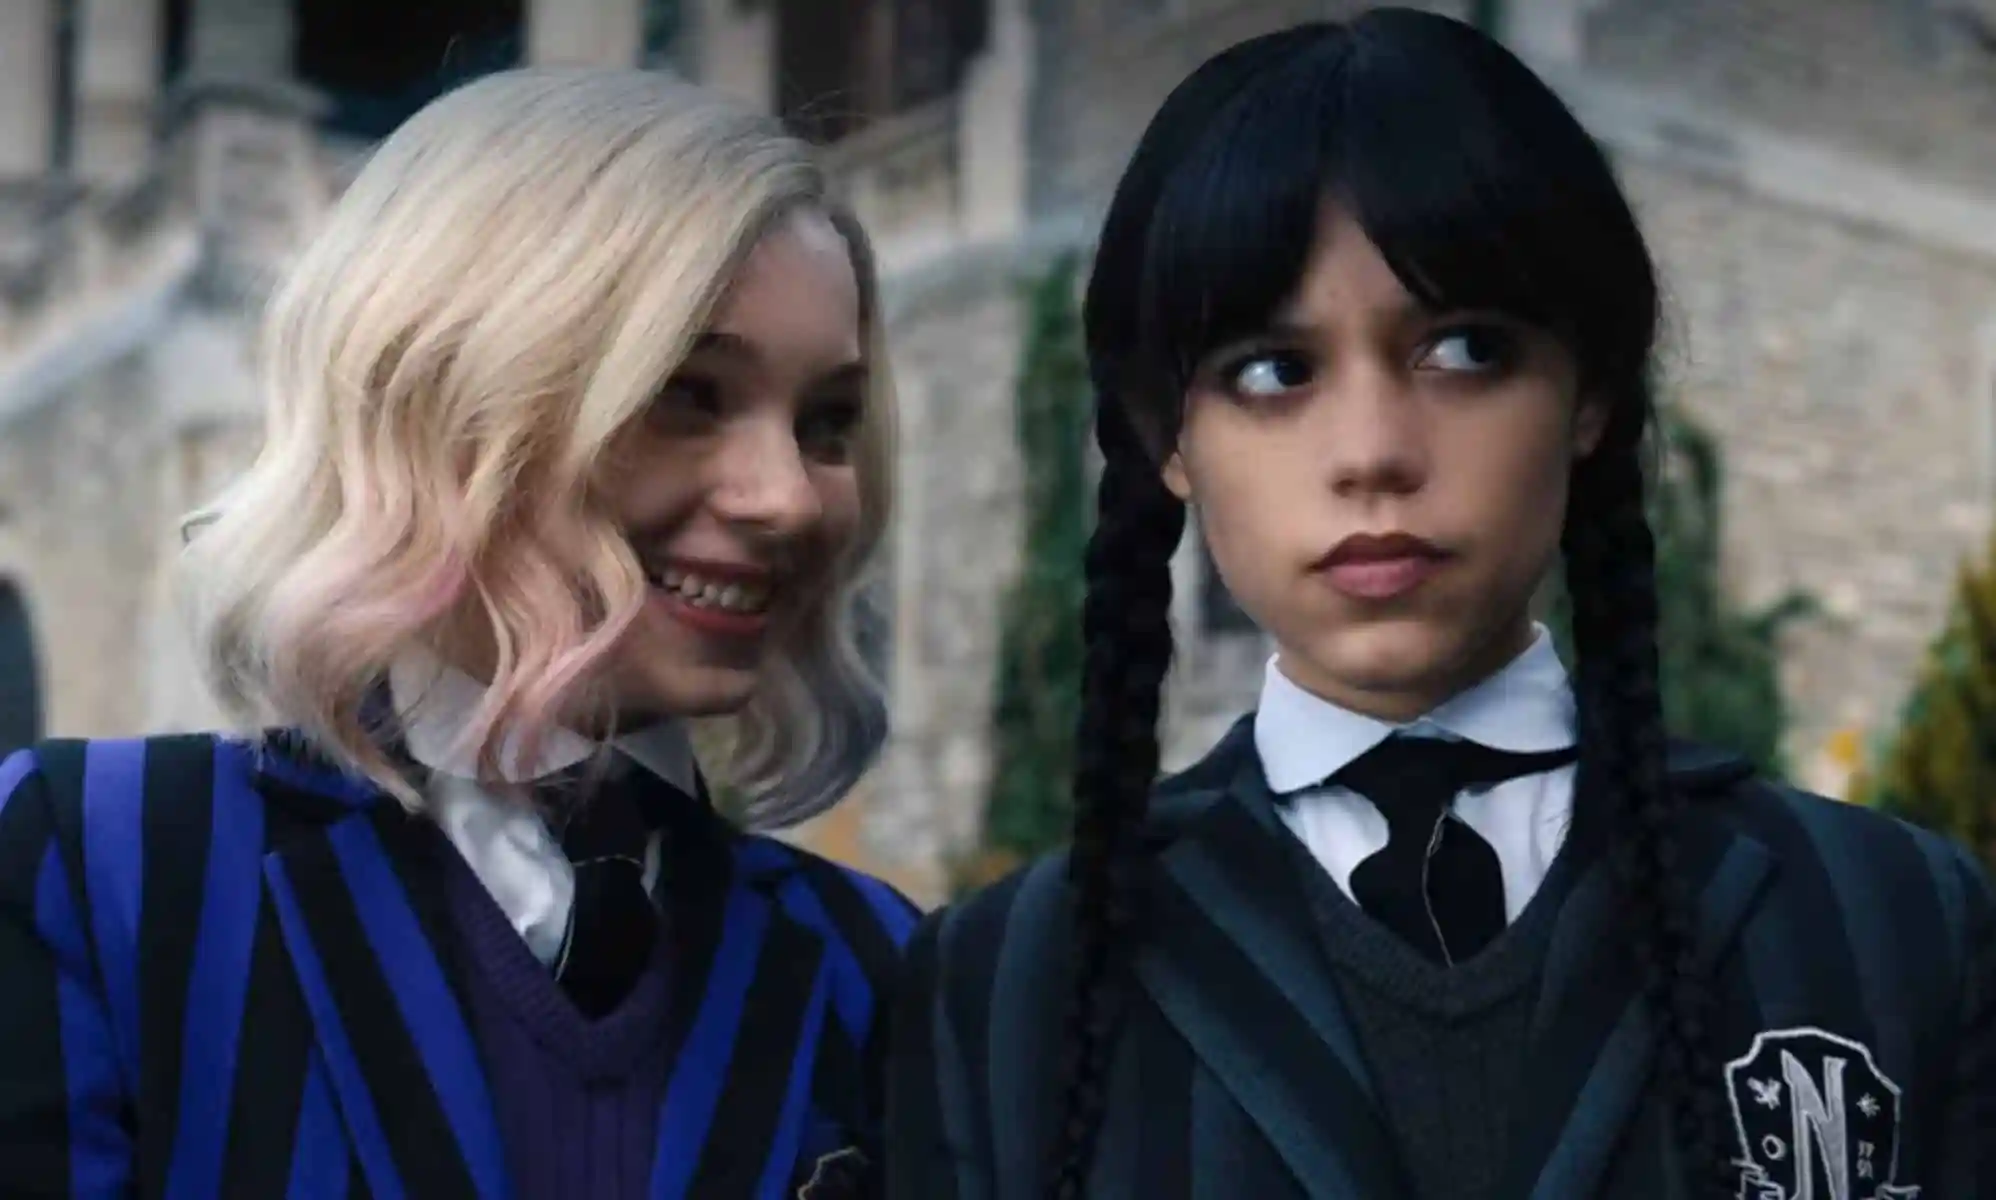 LOOK: Netflix unveils first glimpse of new Addams Family in 'Wednesday